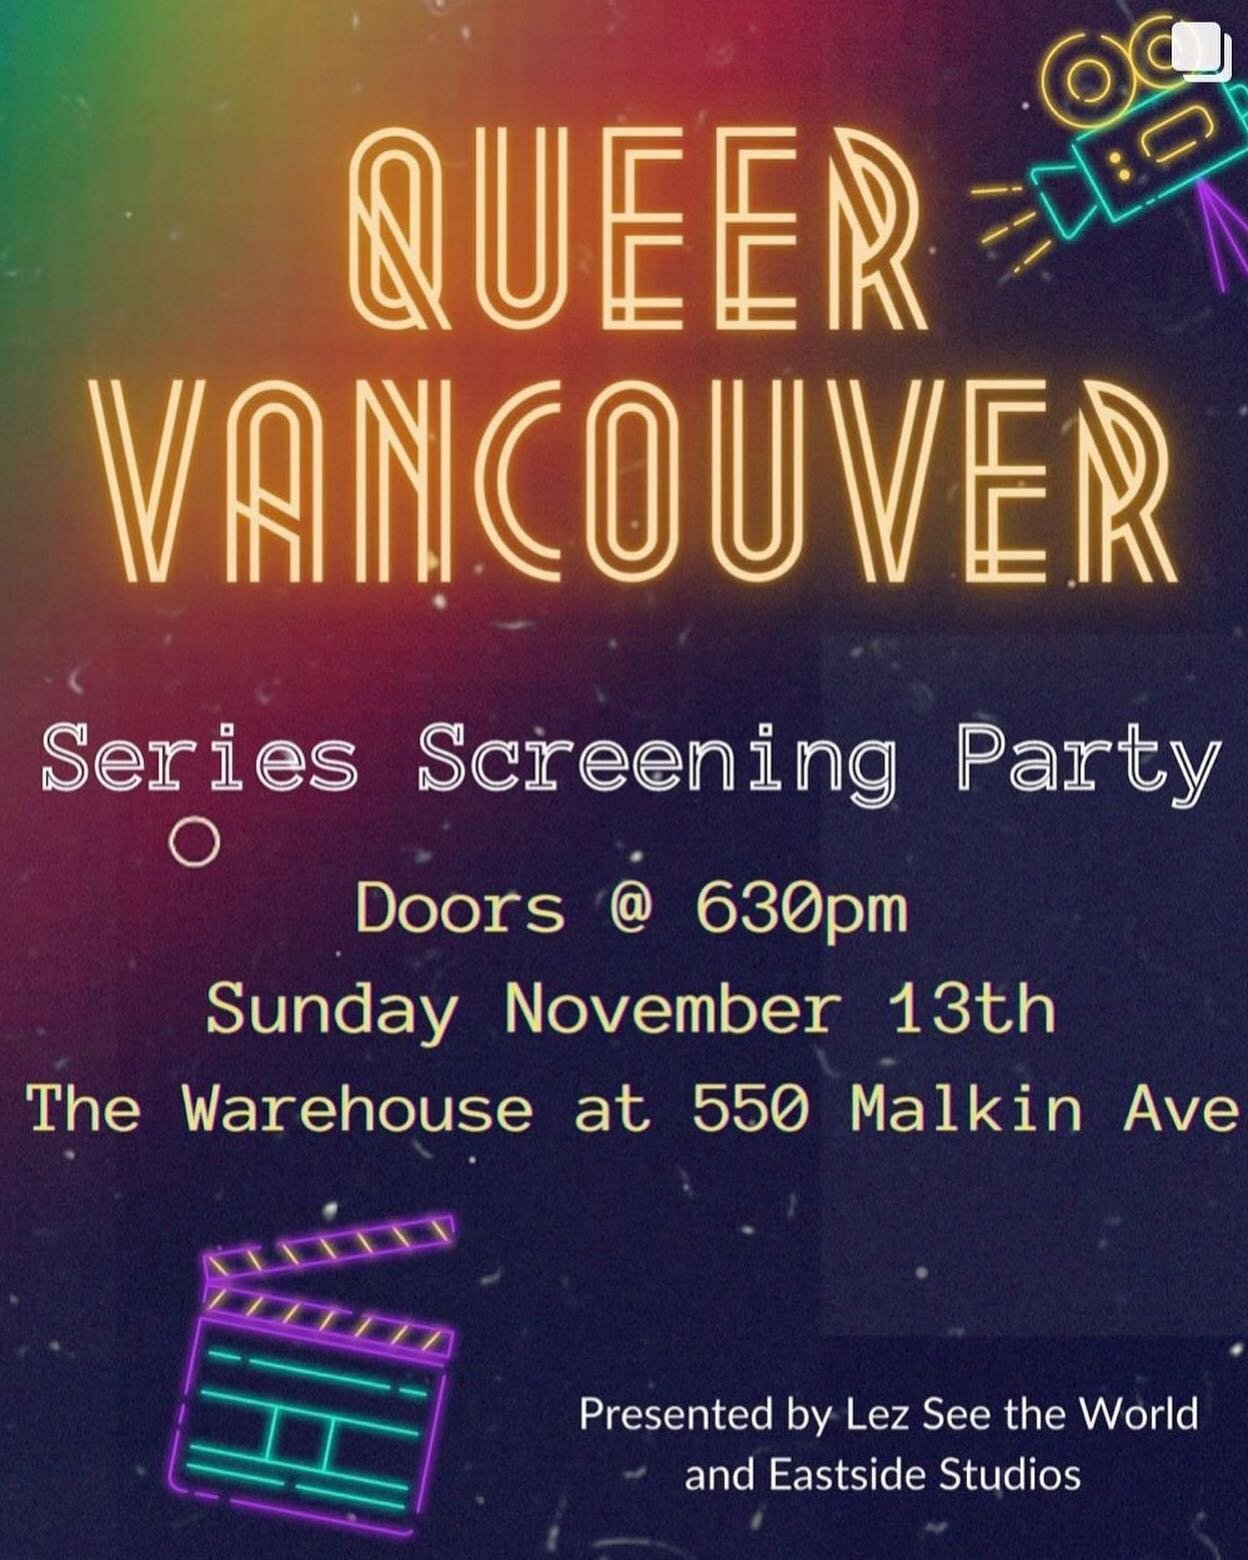 We are in a documentary 🥳! Link to tix in our stories and highlights! See you at the screening for @queervancouver on Nov 13 at @east.side.arts.space 6:30pm 😍